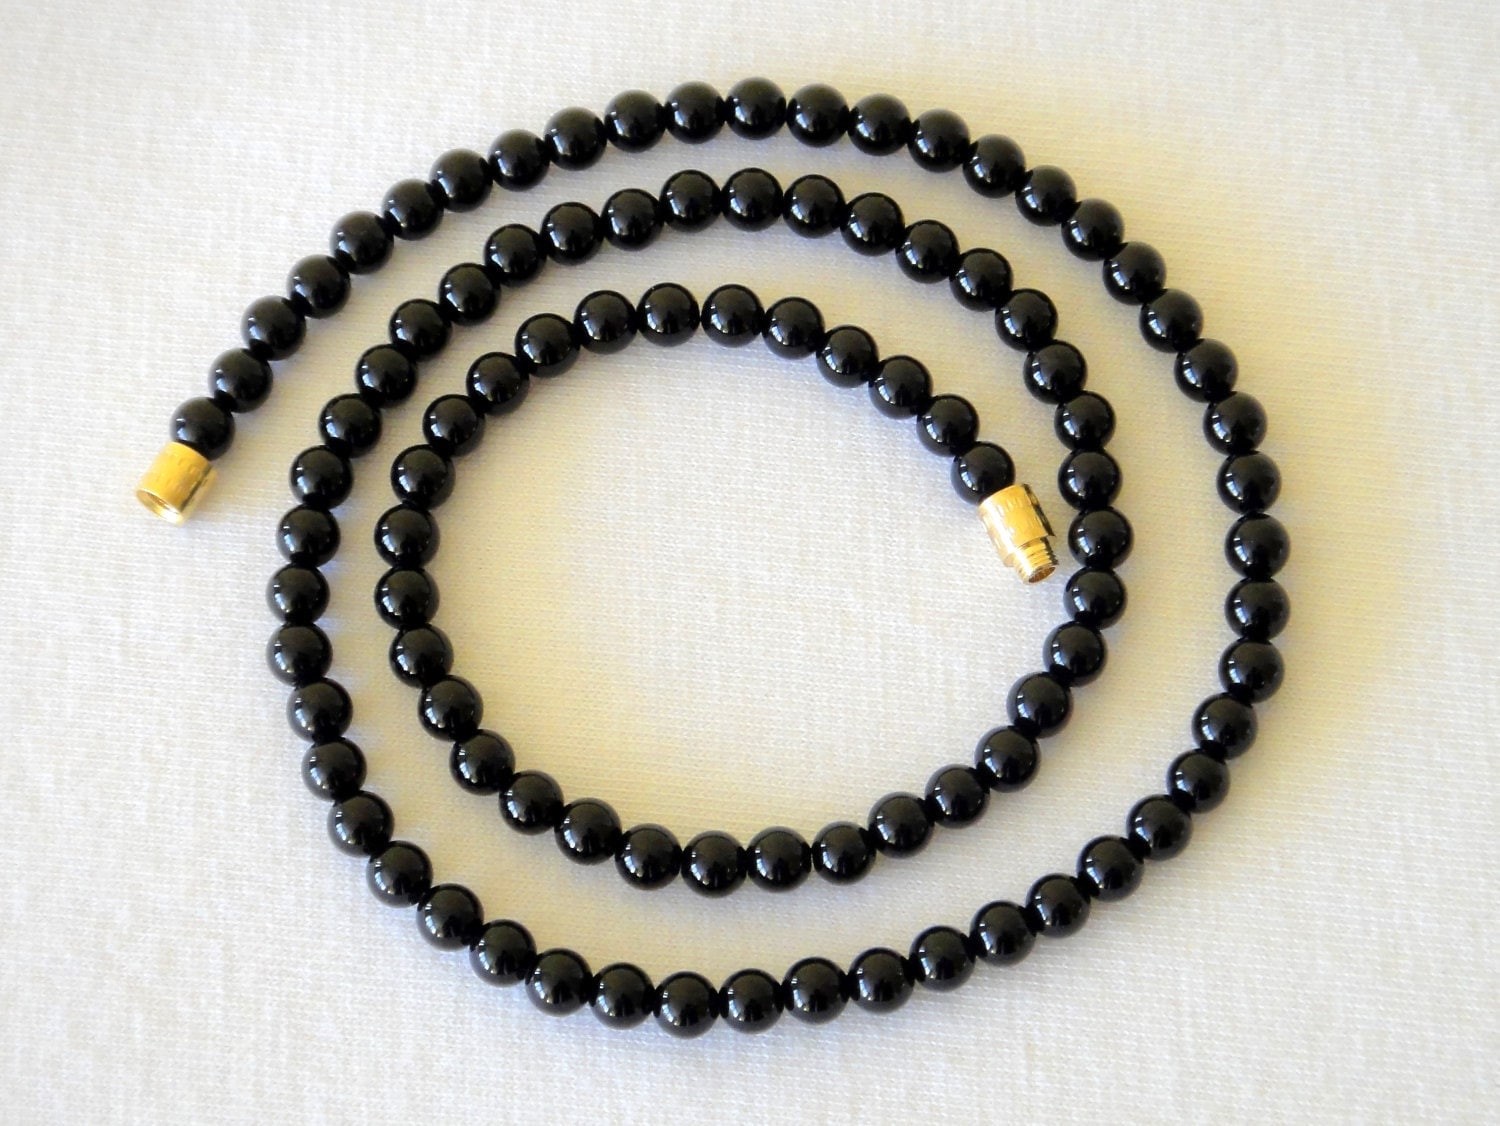 4mm Black Onyx Necklace VARIOUS Length Options. Genuine Natural Stone ...